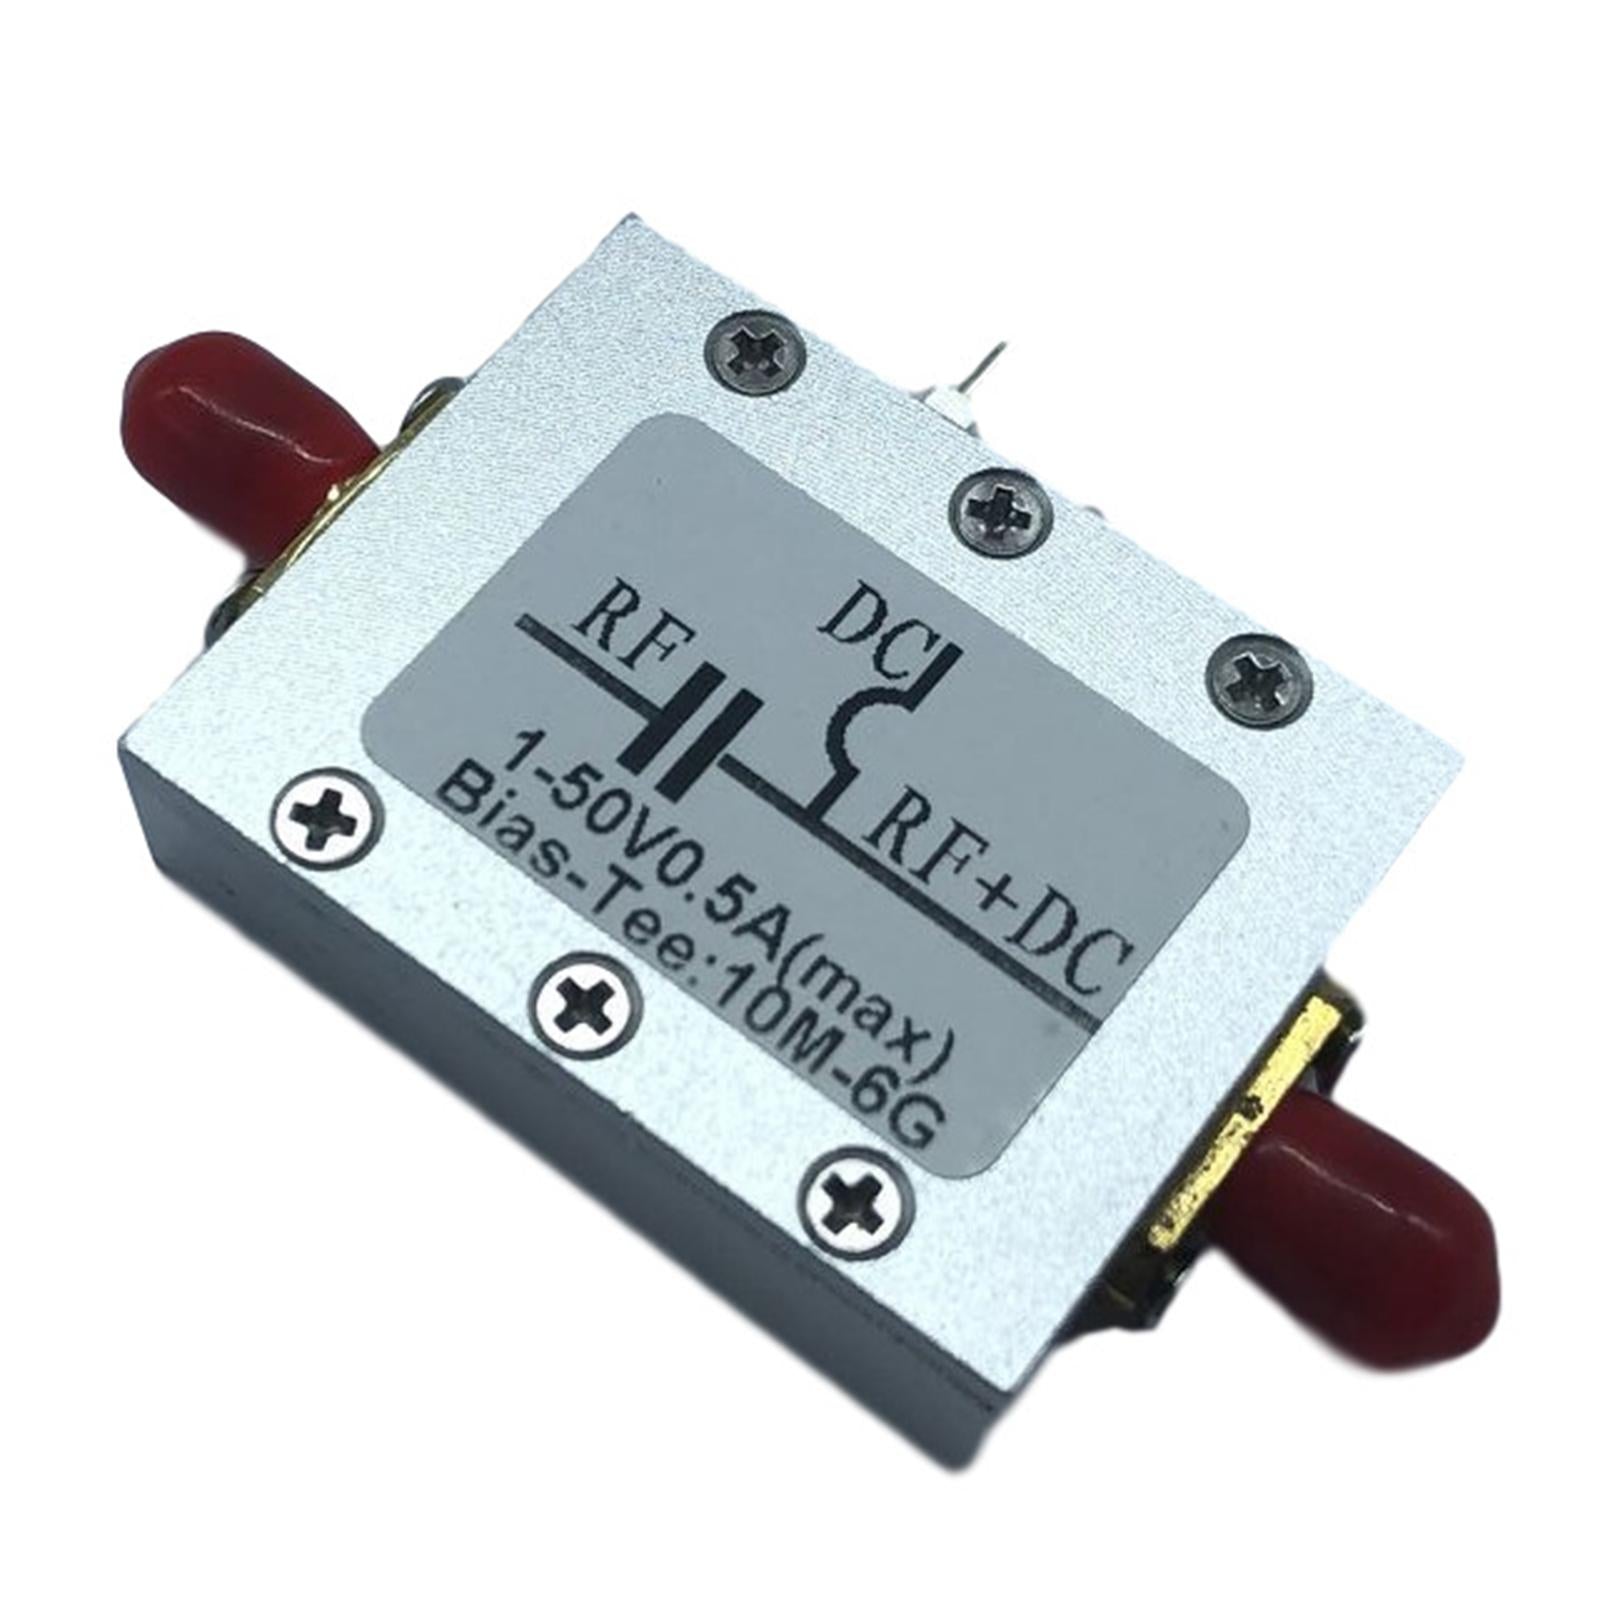 10MHz-6GHz Bias Tee DC Blocks Frequency Microwave for SDR LNA with Case